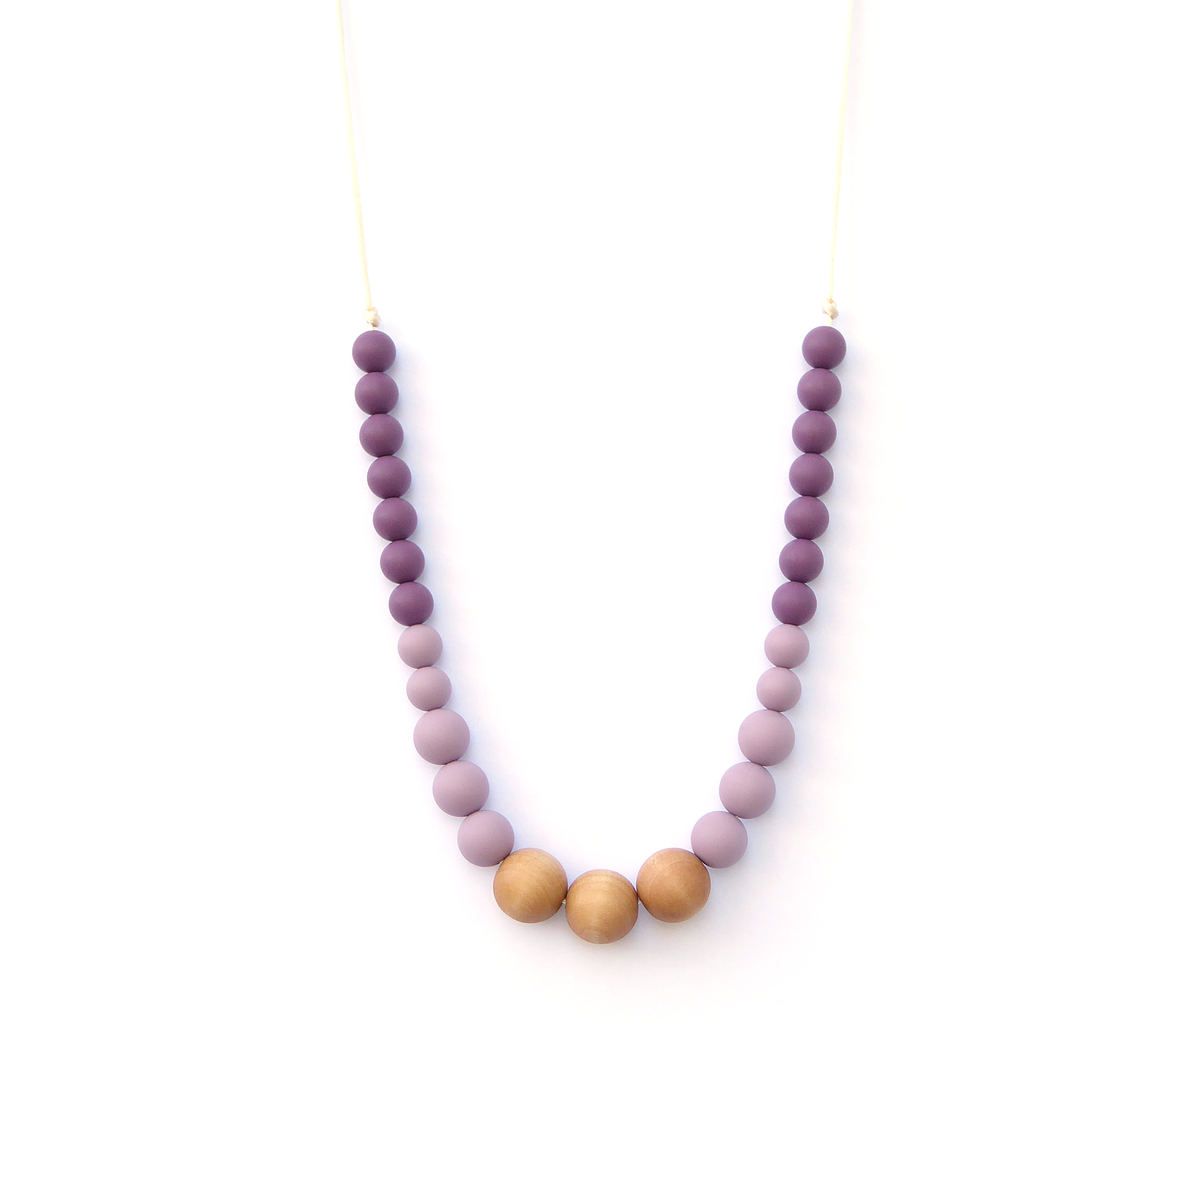 Loulou Lollipop Naturalist Wood + Silicone Teething Necklace